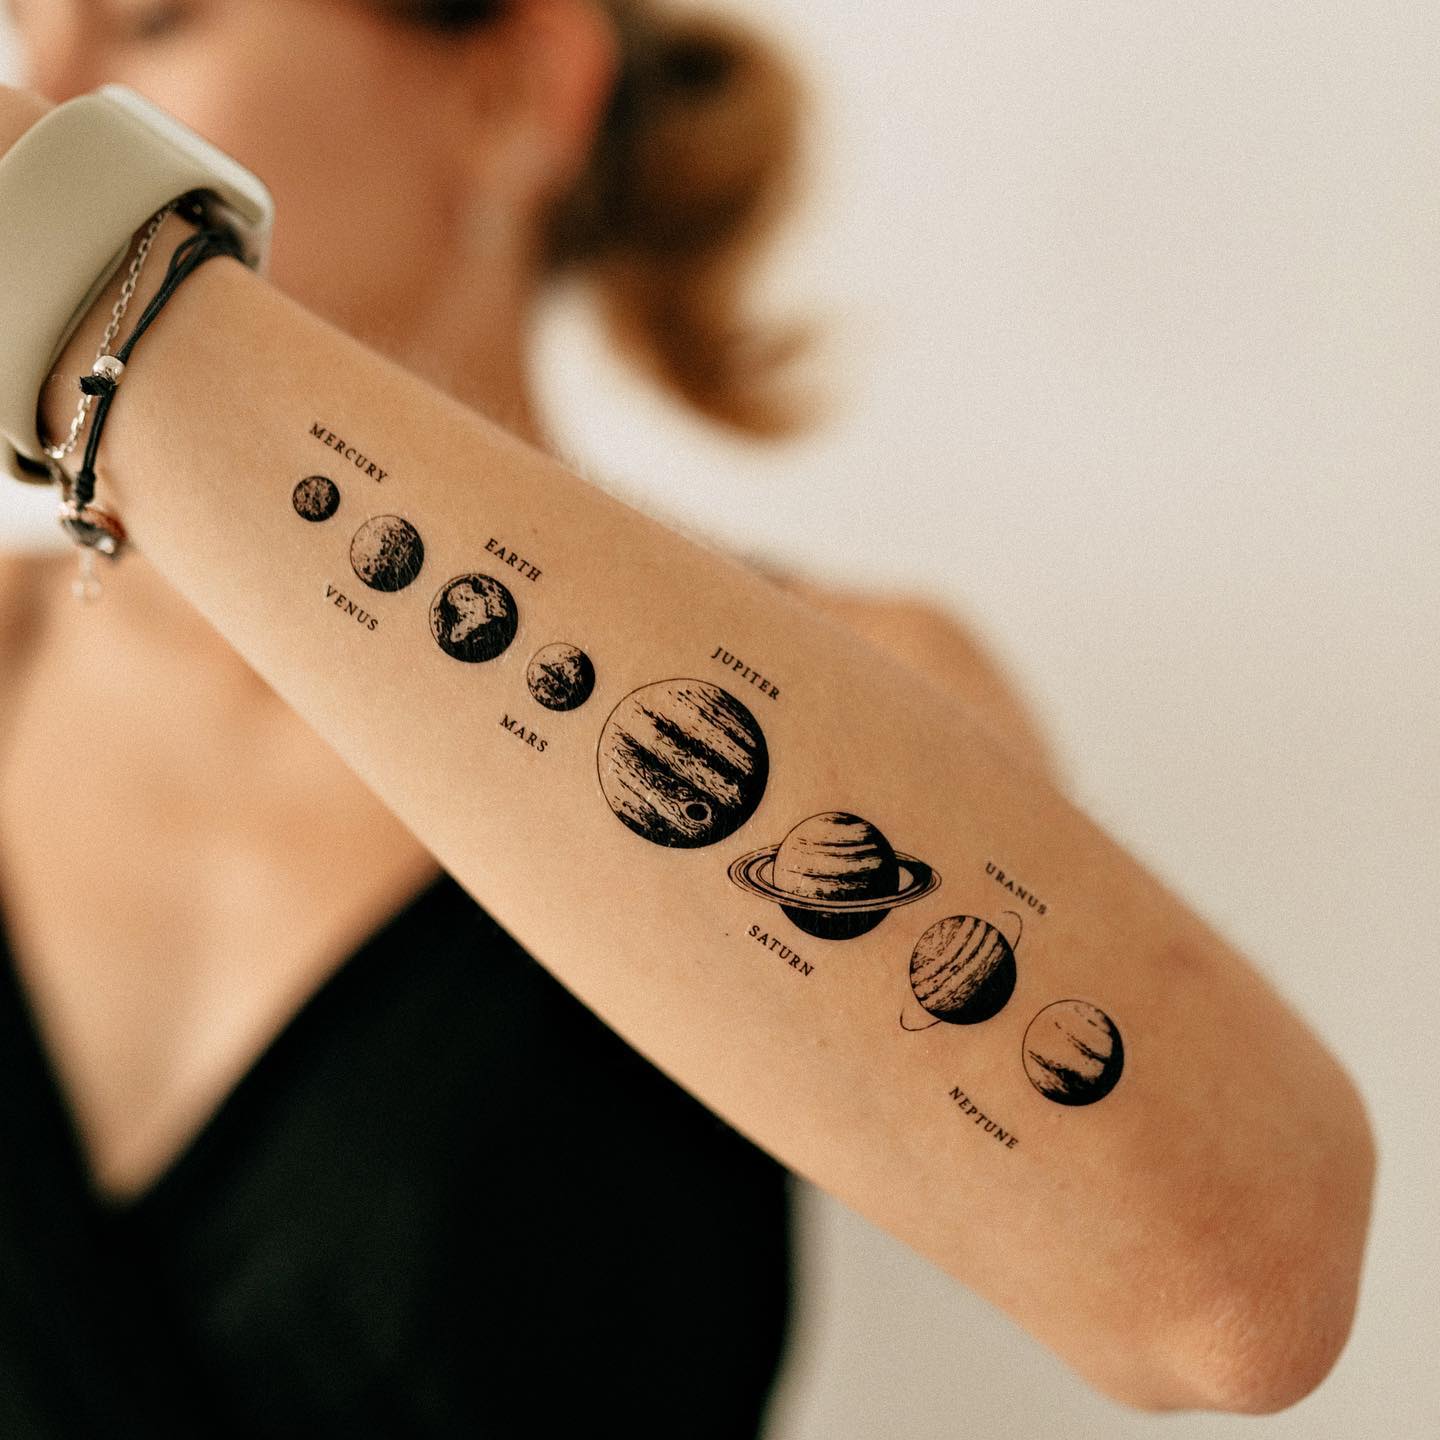 30 Adorable Temporary Tattoo Ideas You Will Want to Try